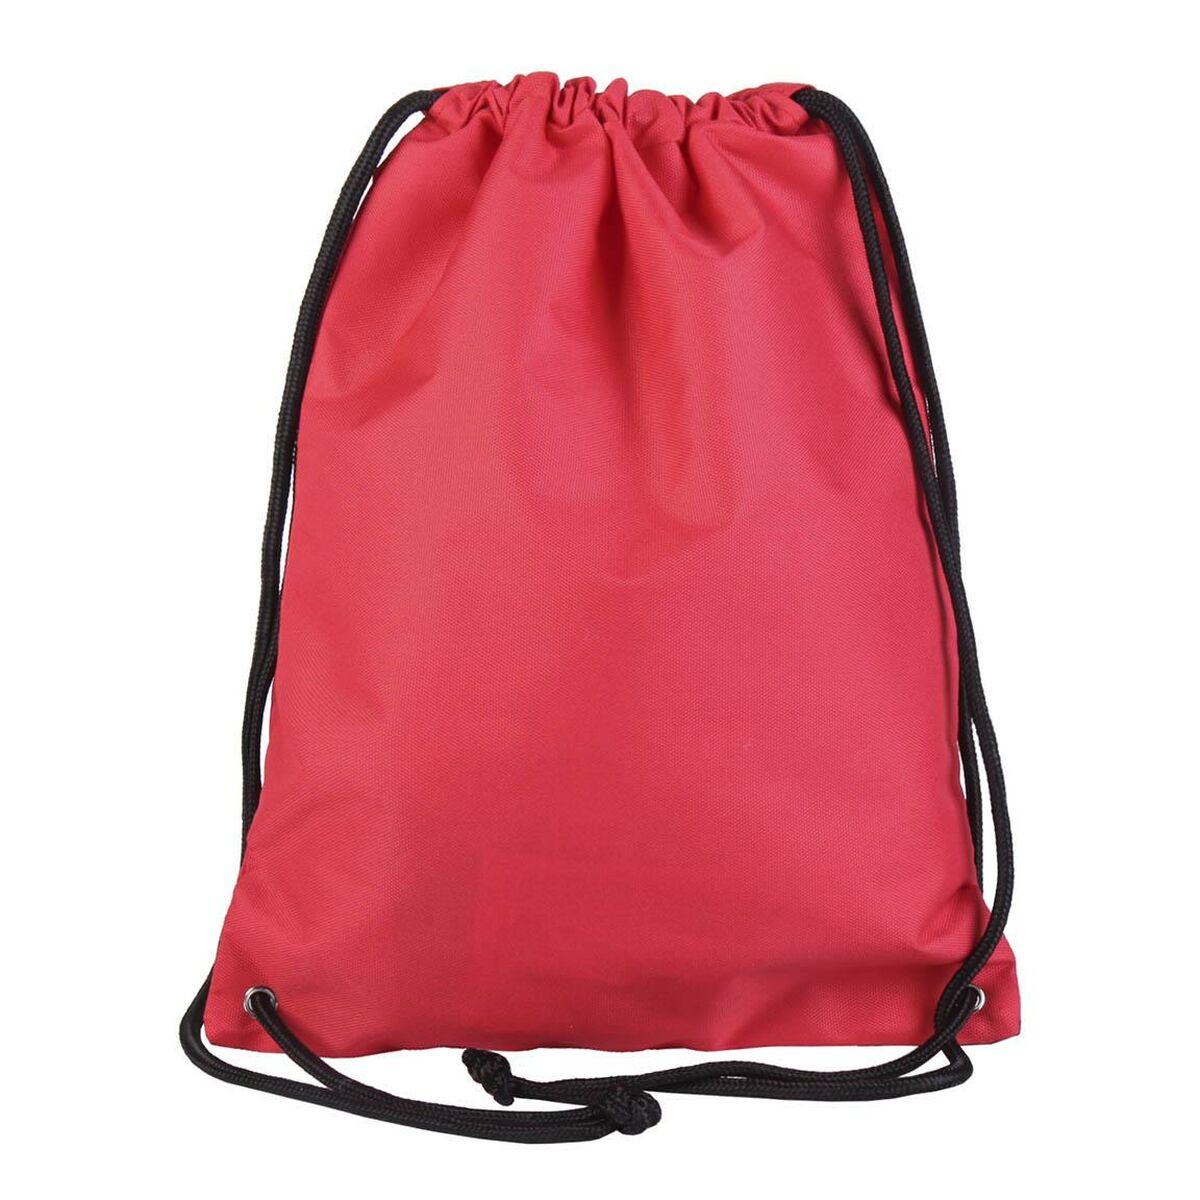 Child's Backpack Bag Minnie Mouse Red-1